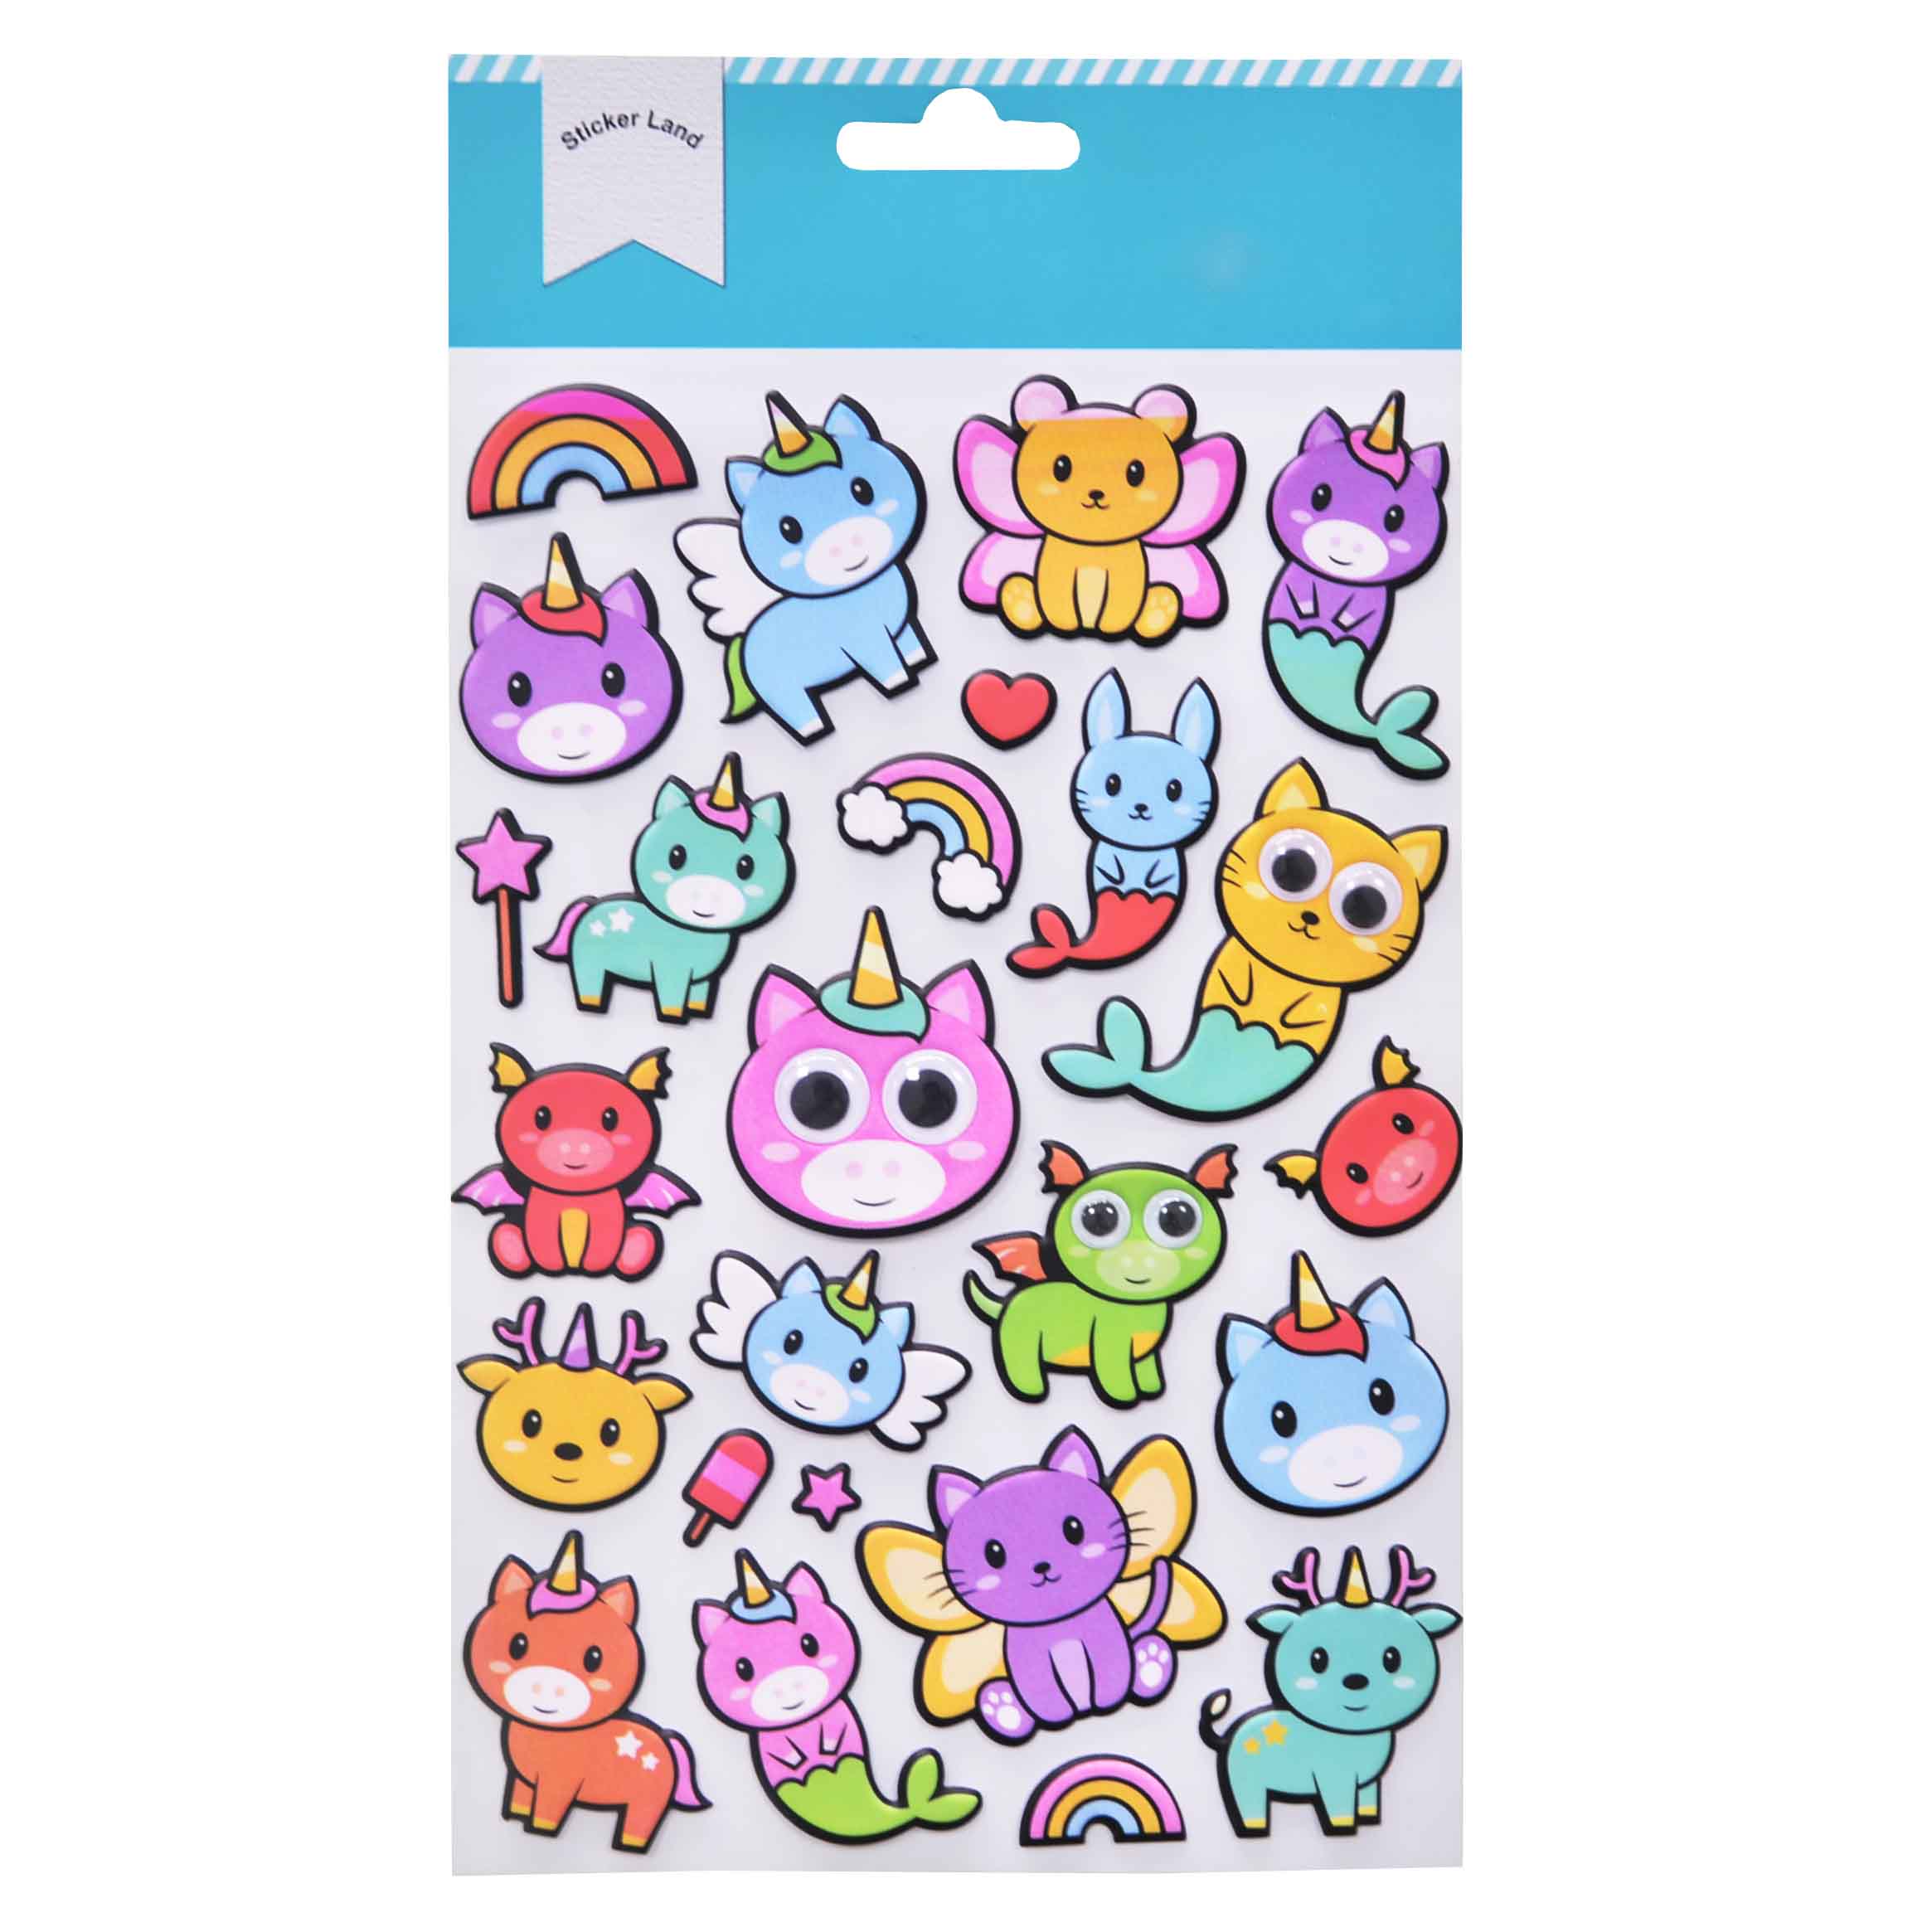 1.5mm Thick Goggle Eye Unicorns 3D Puffy Stickers Manufacturer